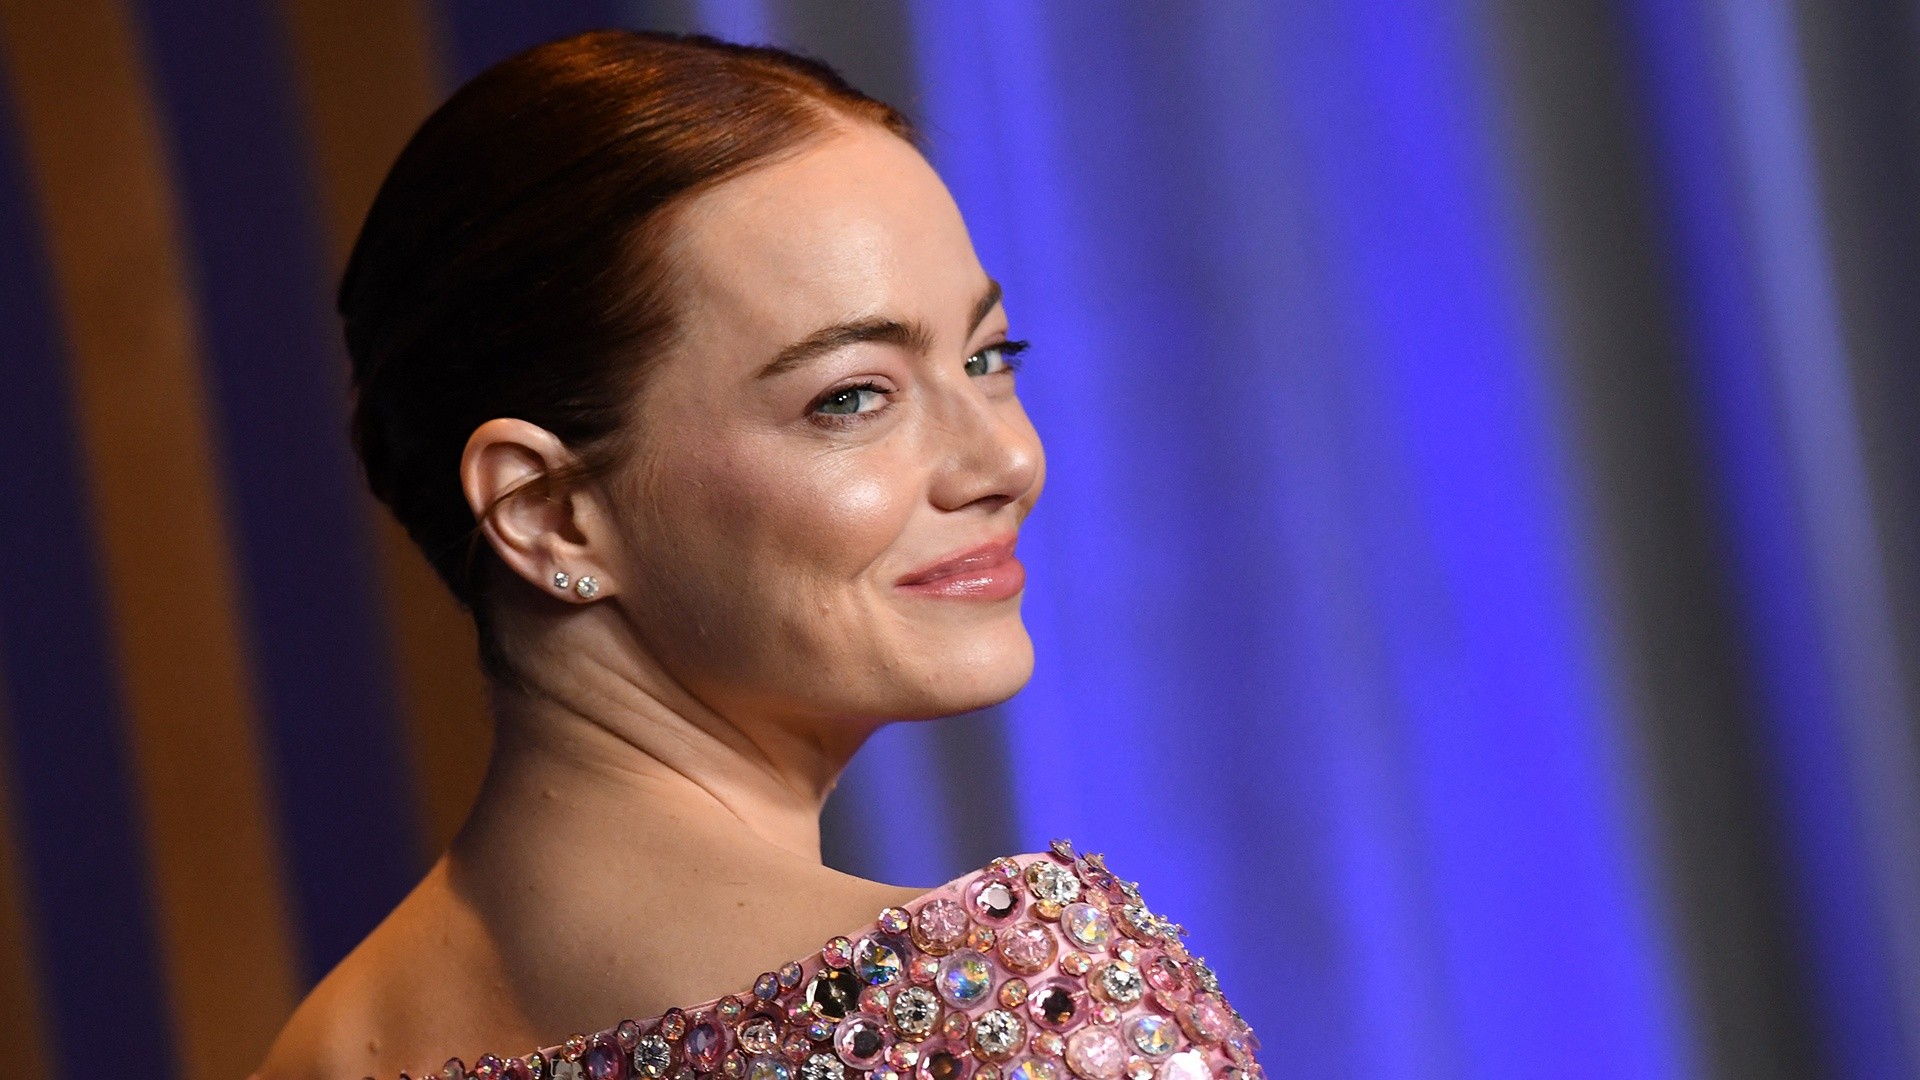 Emma Stone says she applies to be on 'Jeopardy!' every year